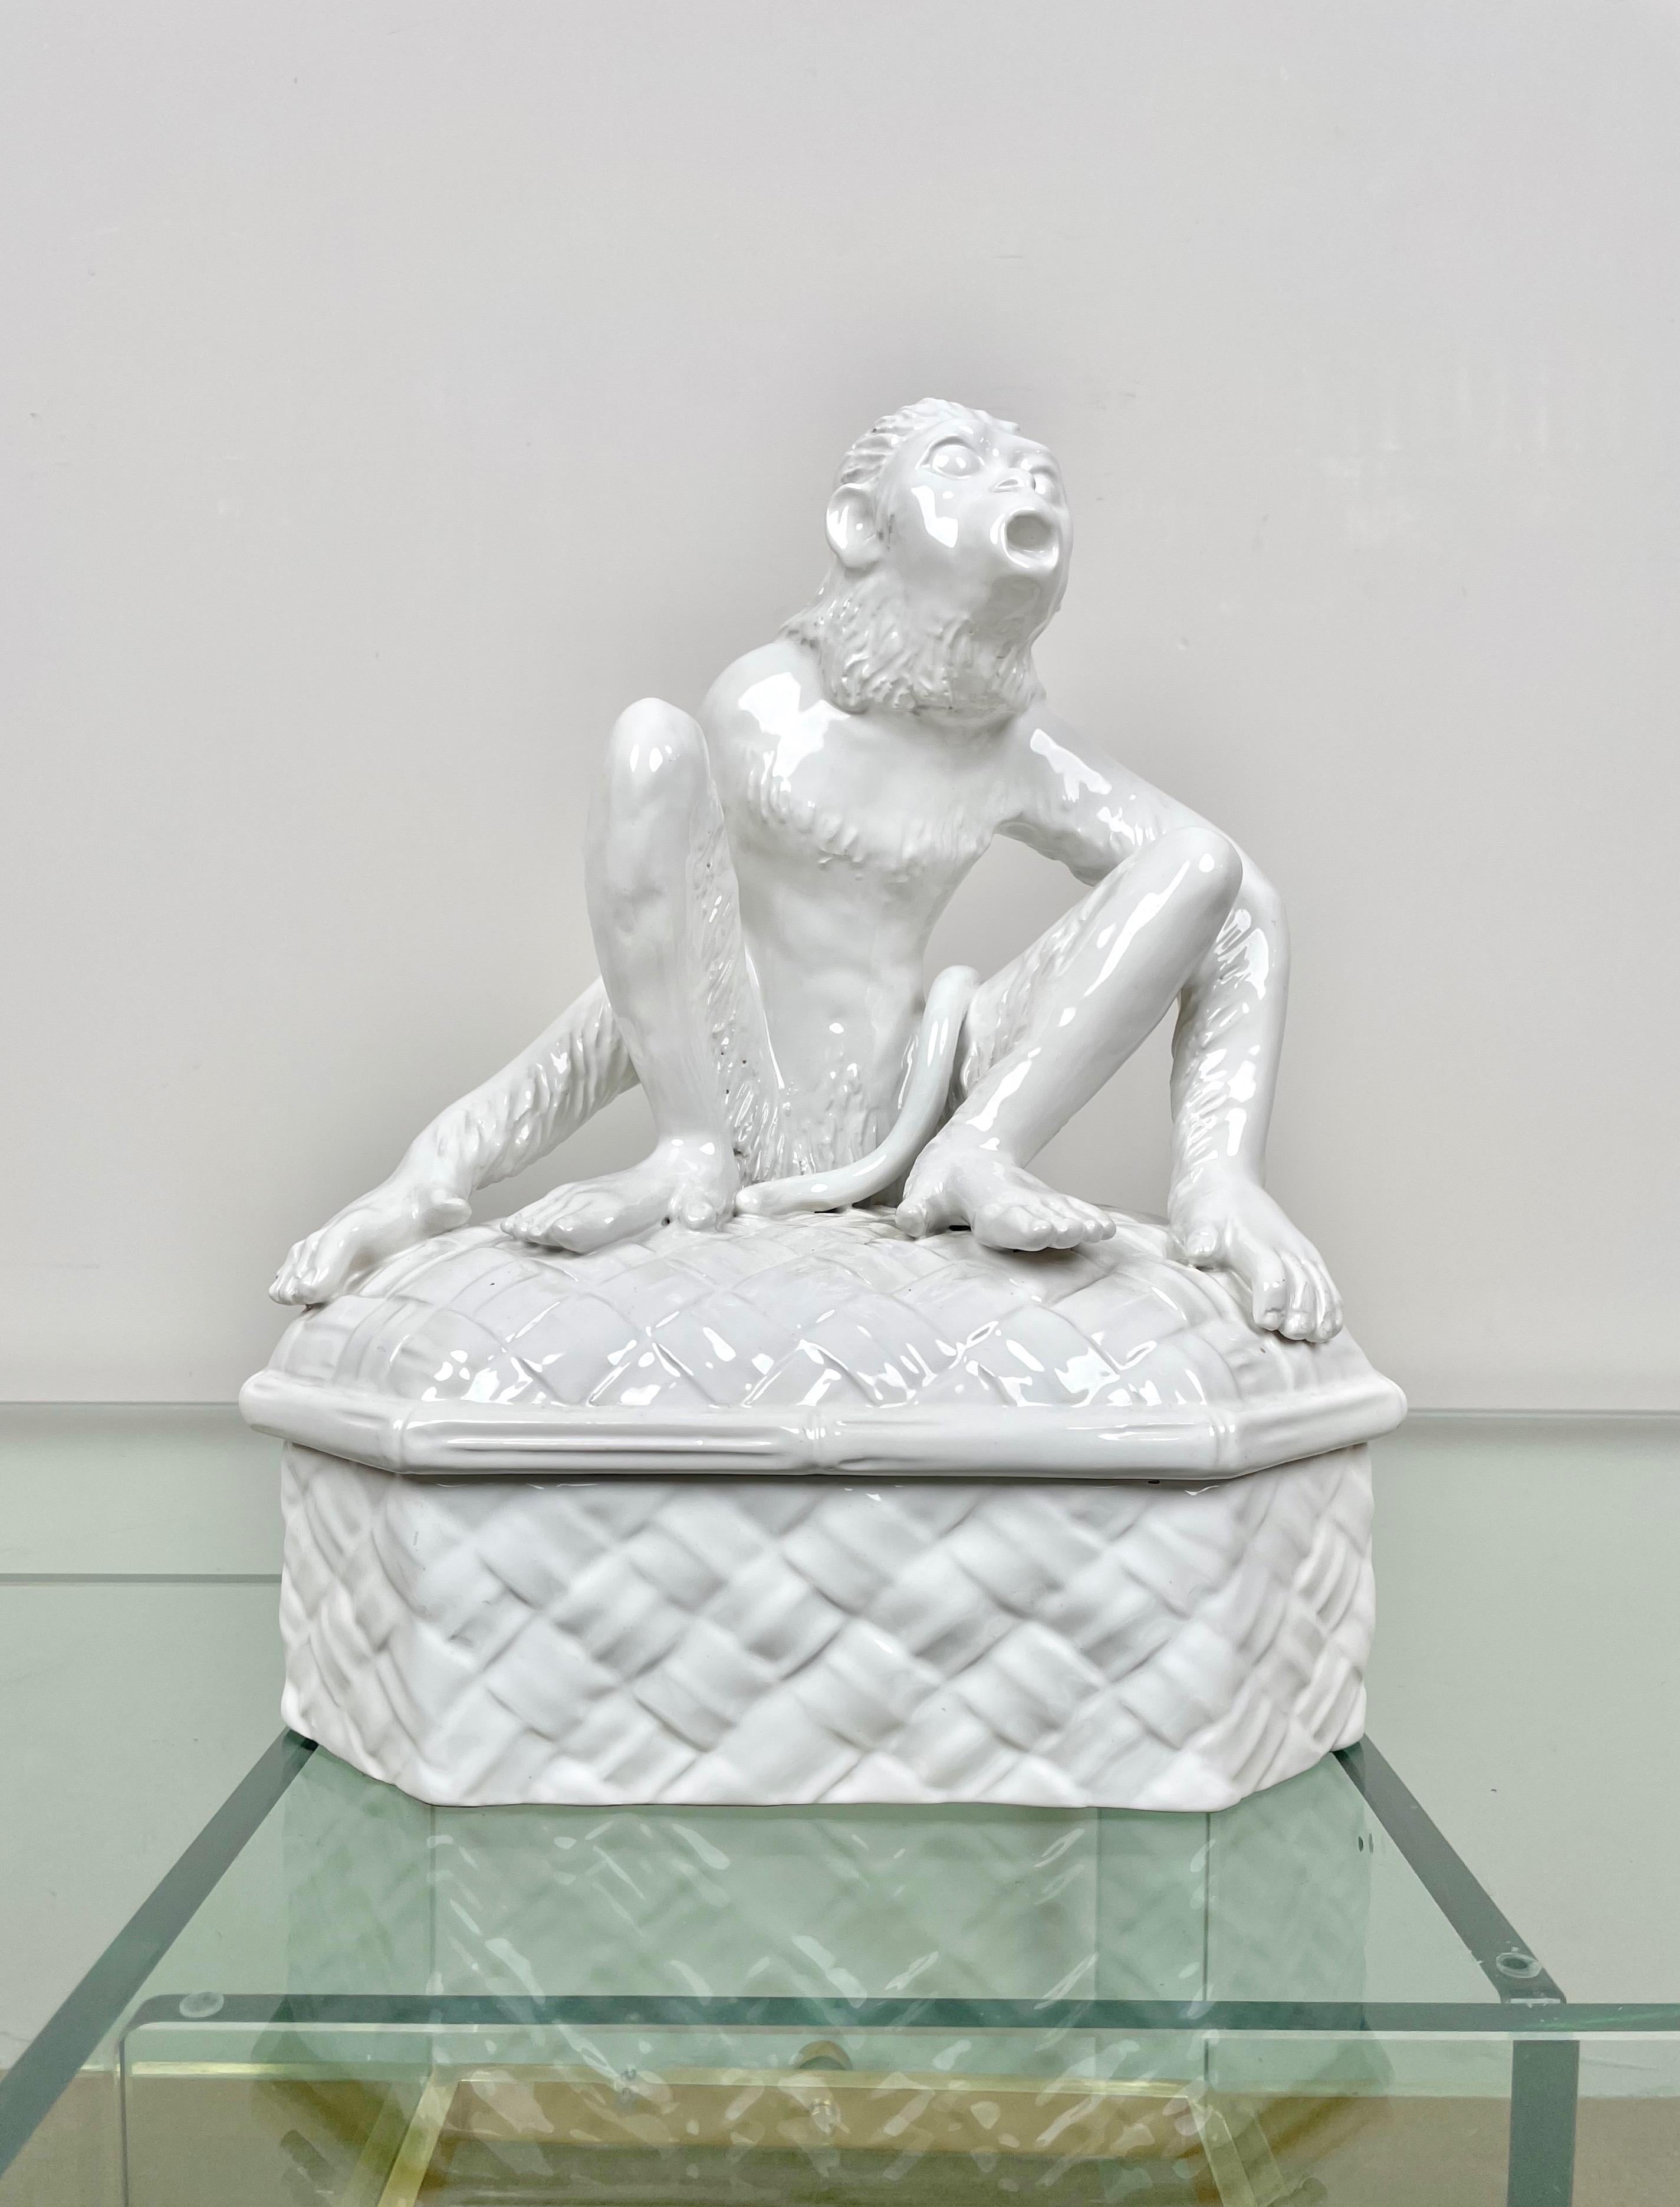 White ceramic box animal sculpture in the shape of a monkey by Vivai del Sud. Made in Italy in the 1970s.

The original label is still attached on the bottom, as shown in the photos.